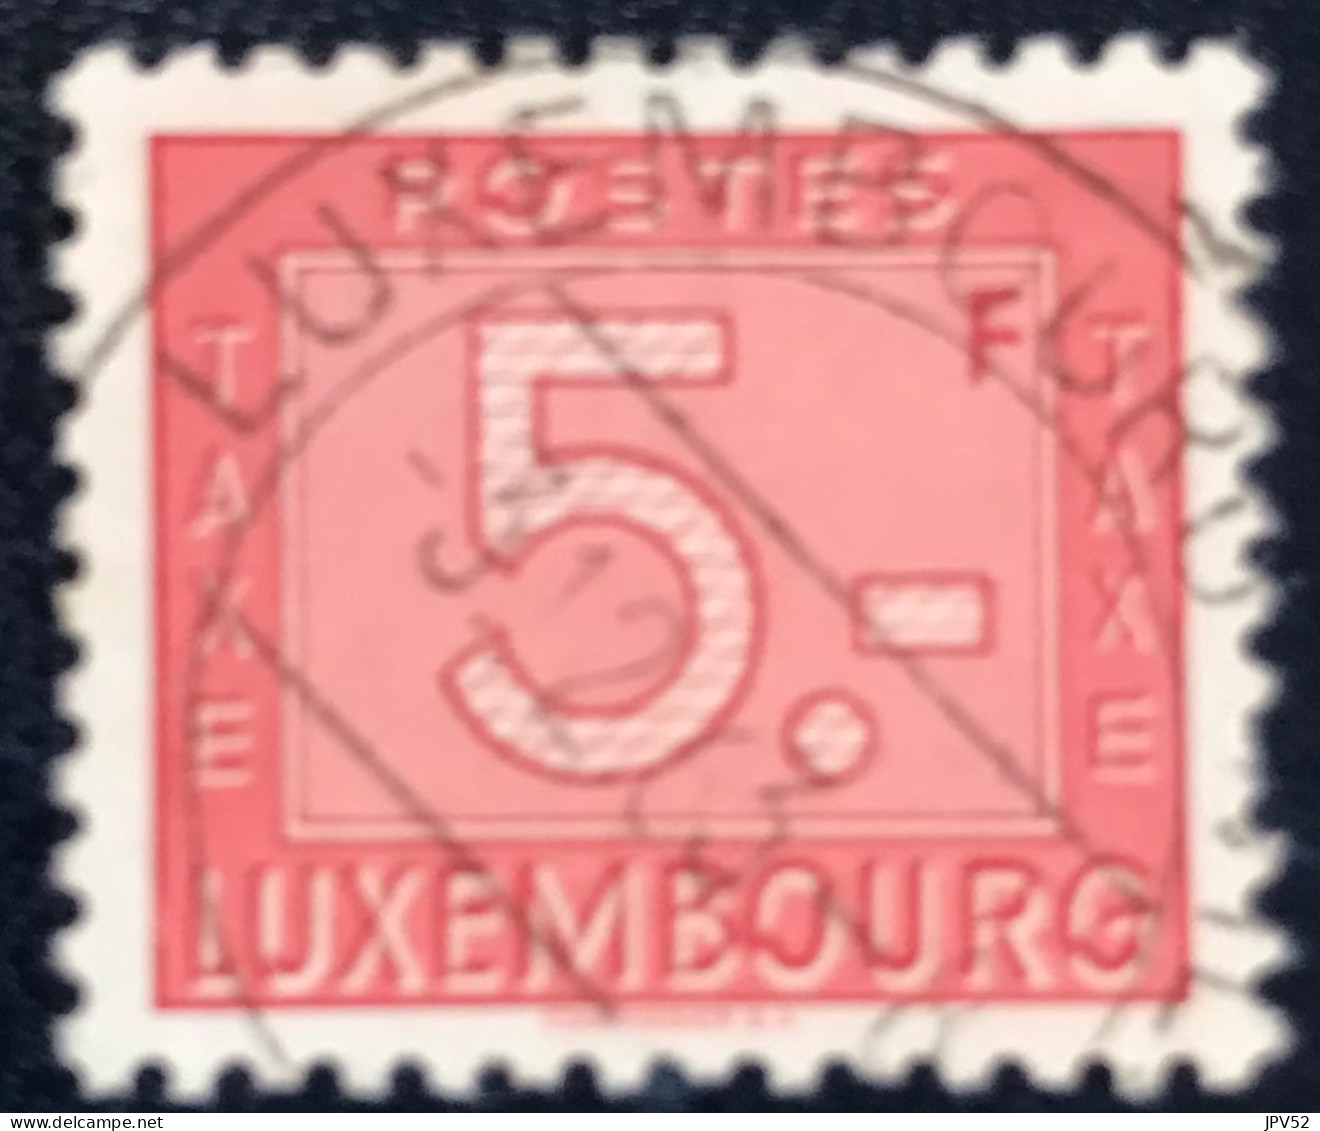 Luxembourg - Luxemburg - C18/33 - 1946 - (°)used - Michel 34 - Strafport - Cijfer - LUXEMBOURG - Postage Due